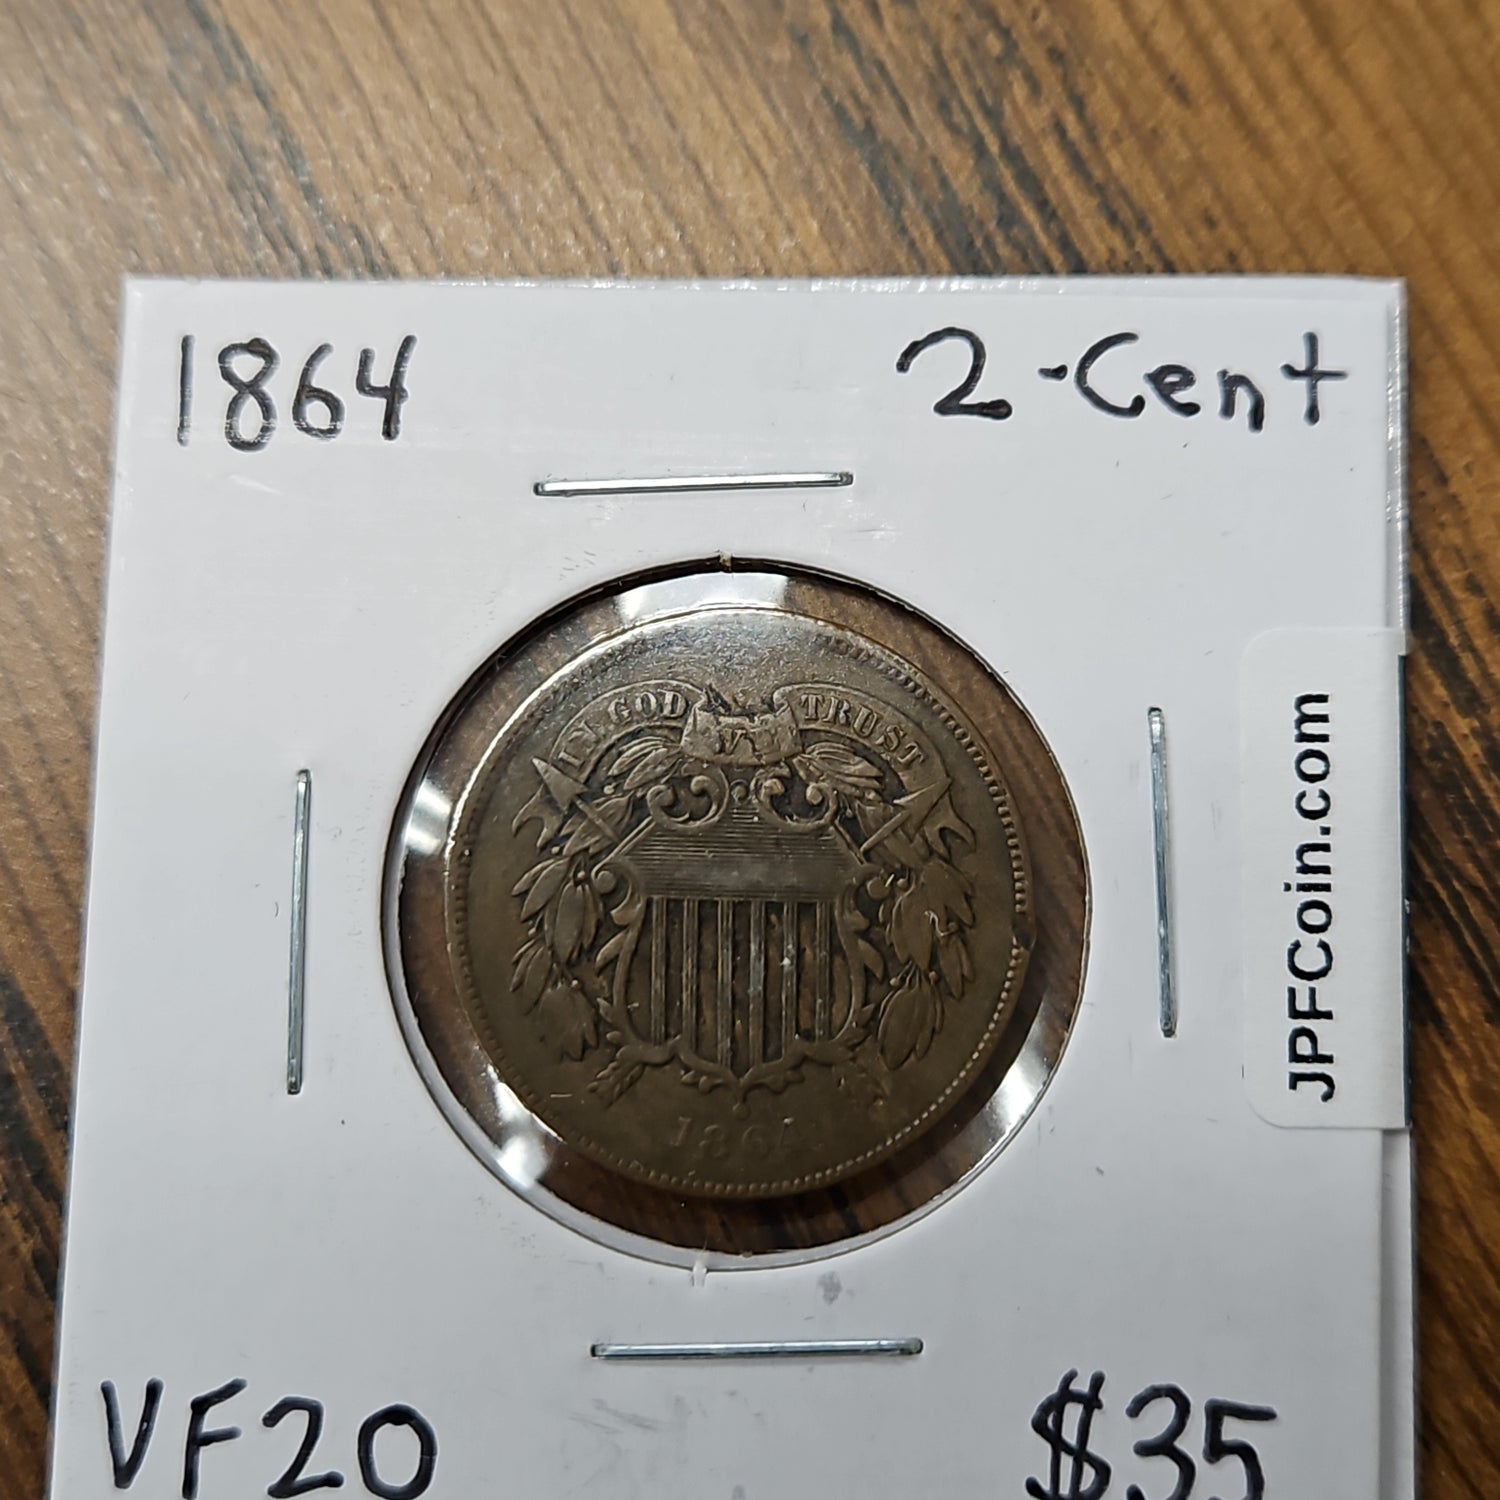 2 Cent , 3 Cent and 20 Cent Pieces